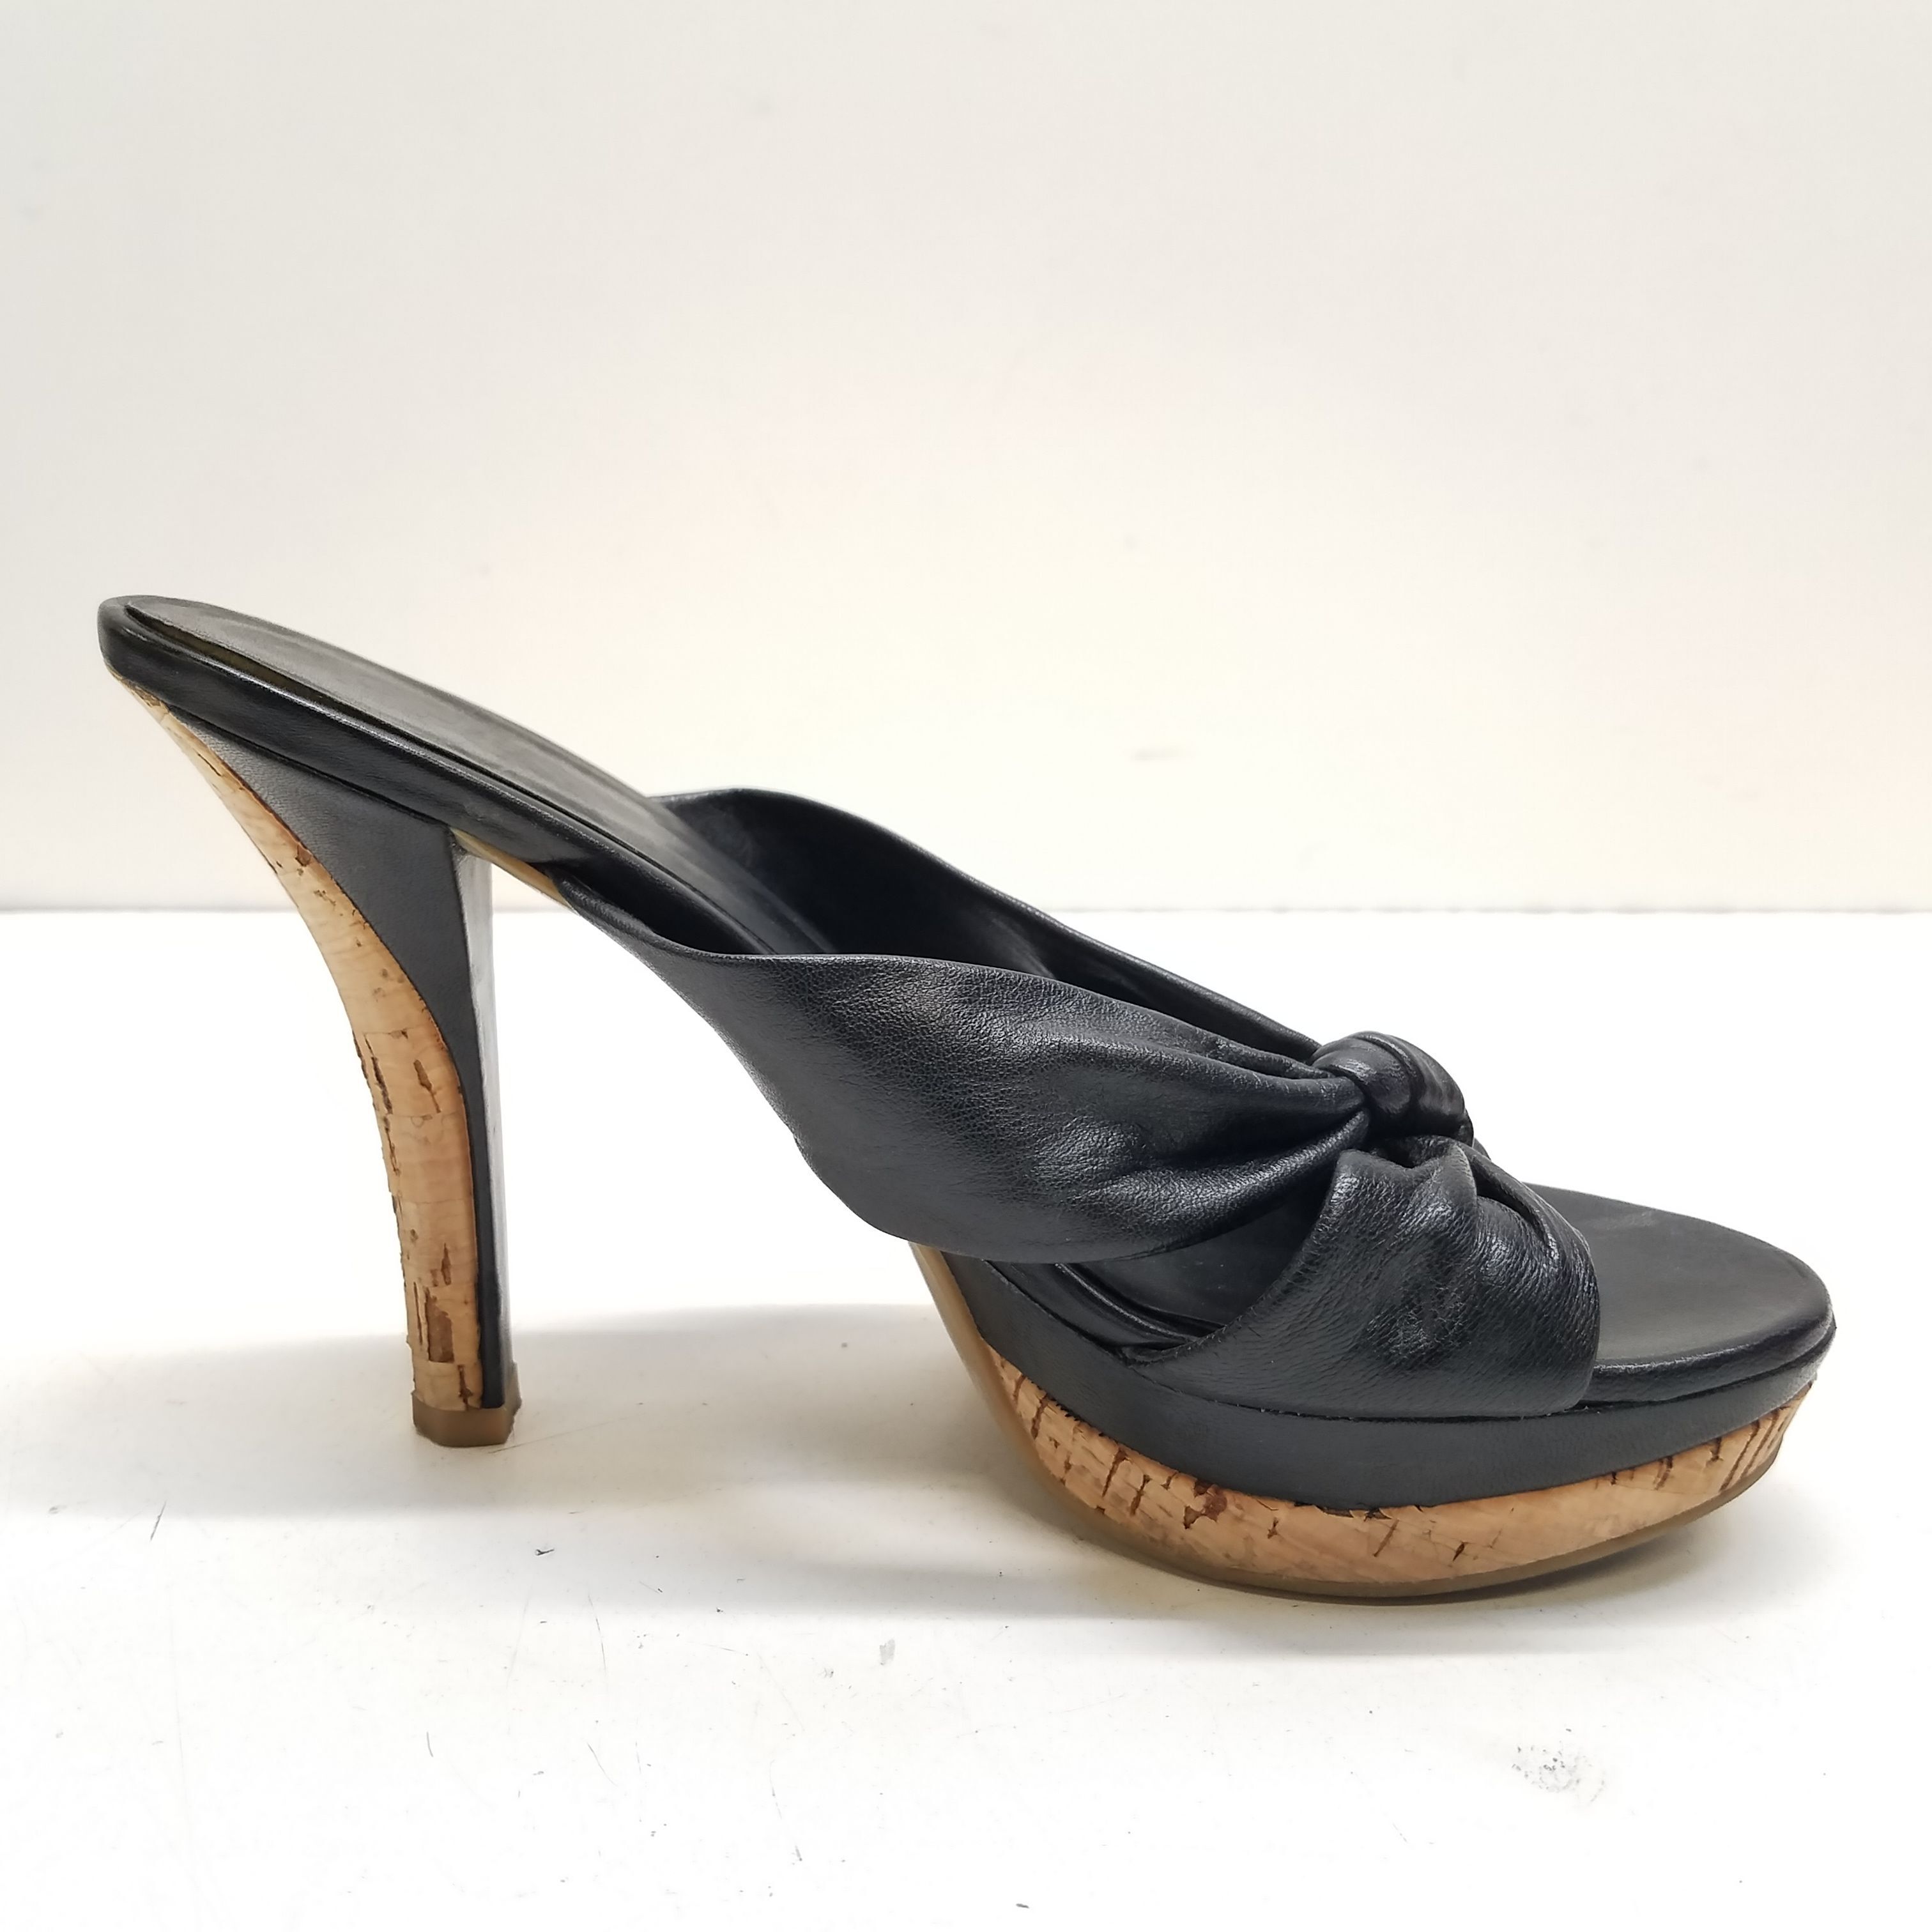 Guess Marciano Black Heels Size 7.0 · Kissy's Kloset · Online Store Powered  by Storenvy